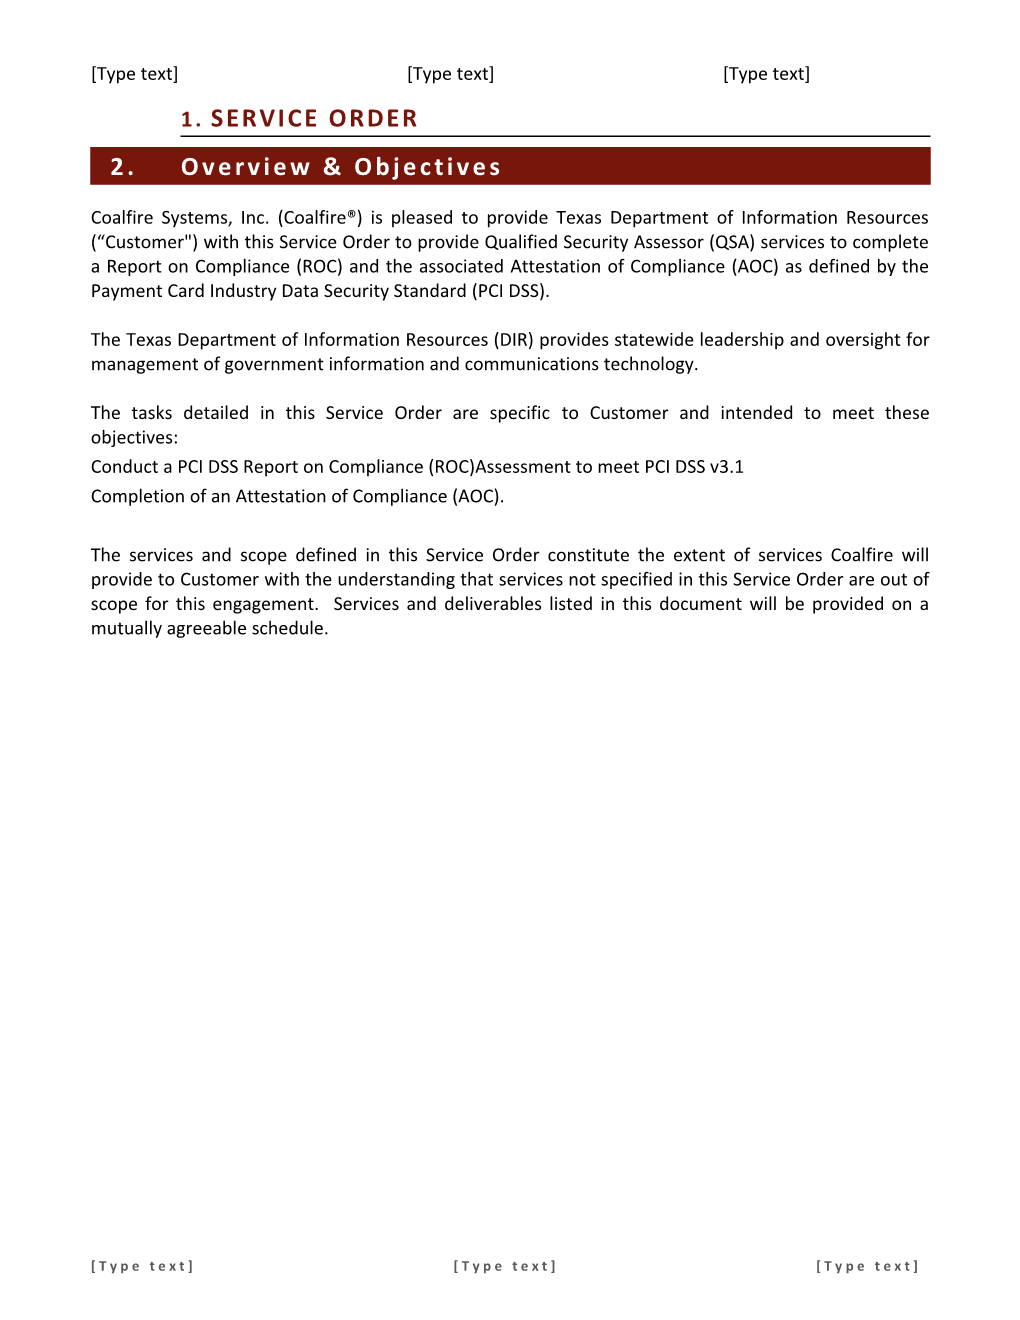 Texas Department of Information Resources (16-0406-TDIR V3) PCI DSS V3 1 Report on Compliance